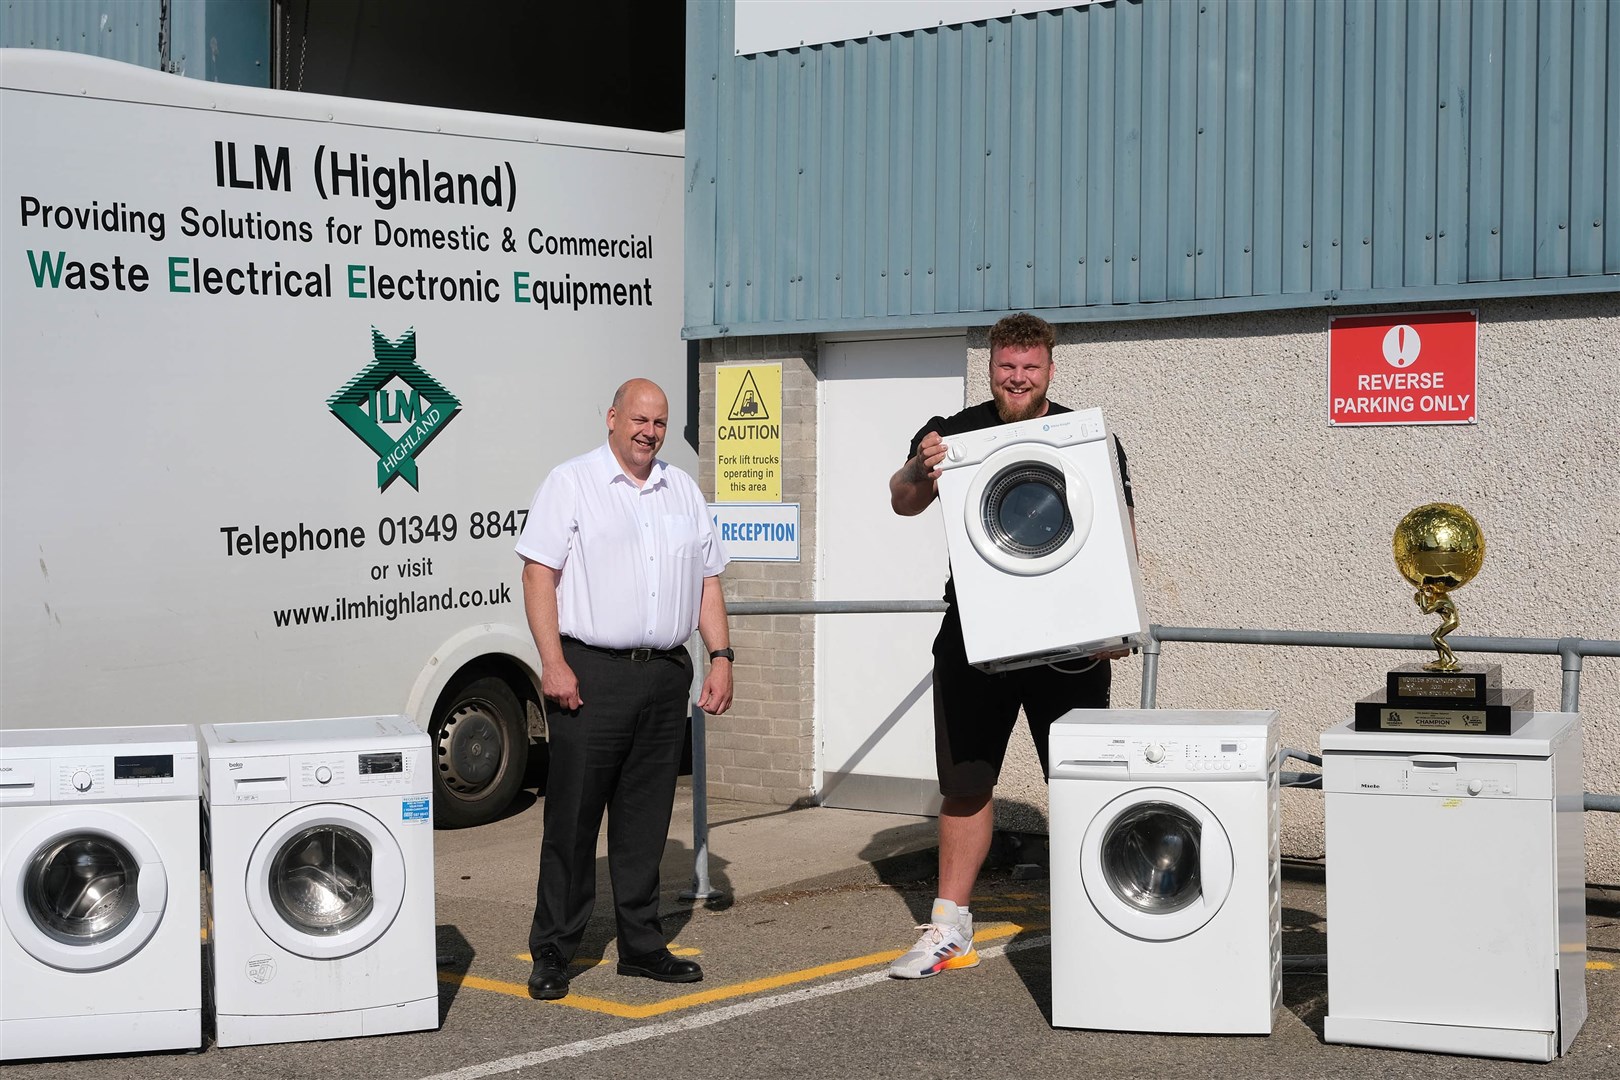 World’s Strongest Man Tom Stoltman (right) and Martin MacLeod celebrate ILM Highland’s environmental and social achievements over the last 12 months.